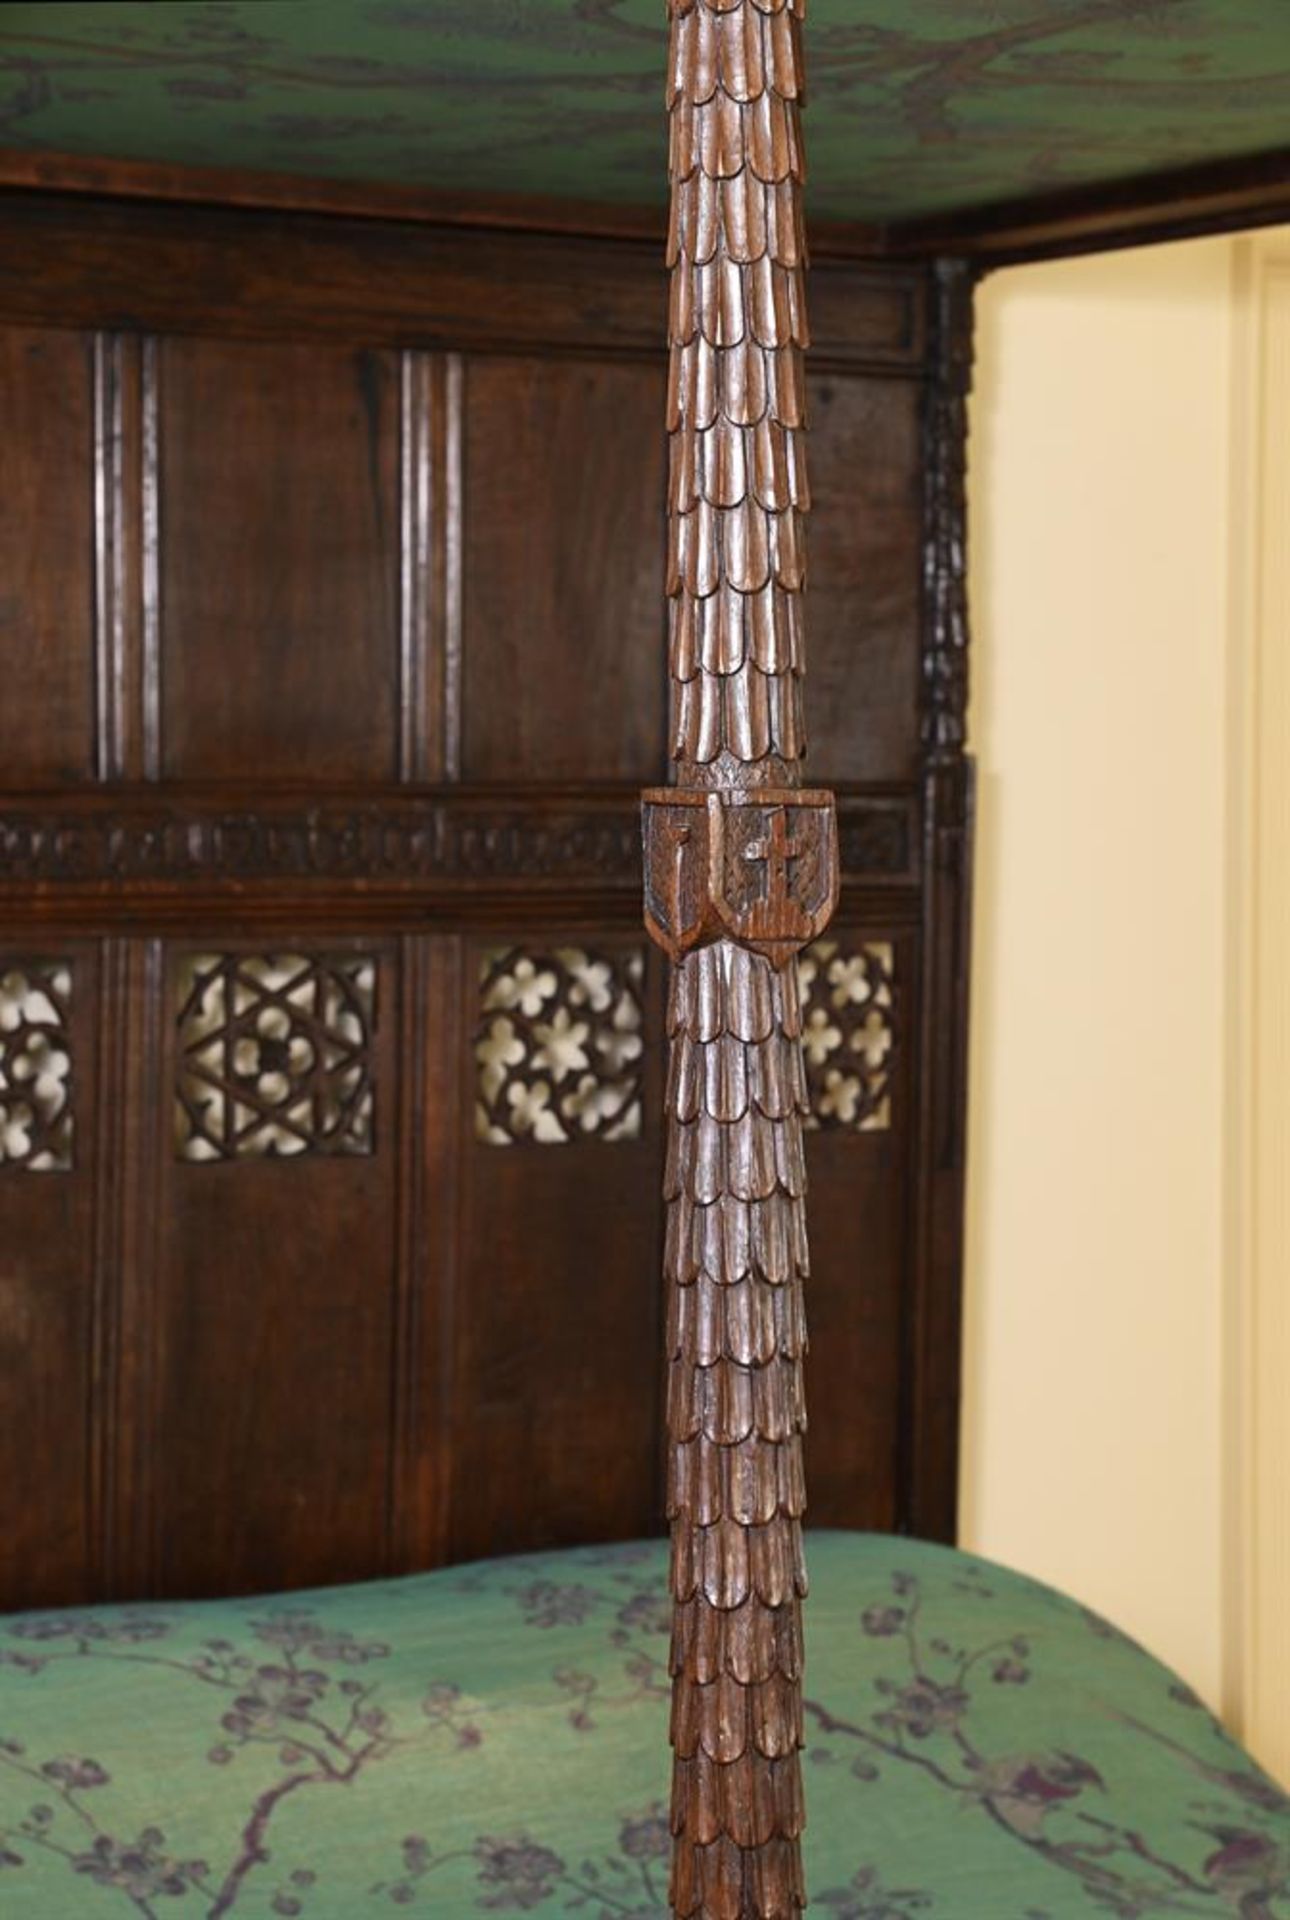 A CARVED OAK TESTER BED, POSSIBLY LATE 15TH CENTURY AND LATER ELEMENTS - Image 6 of 6